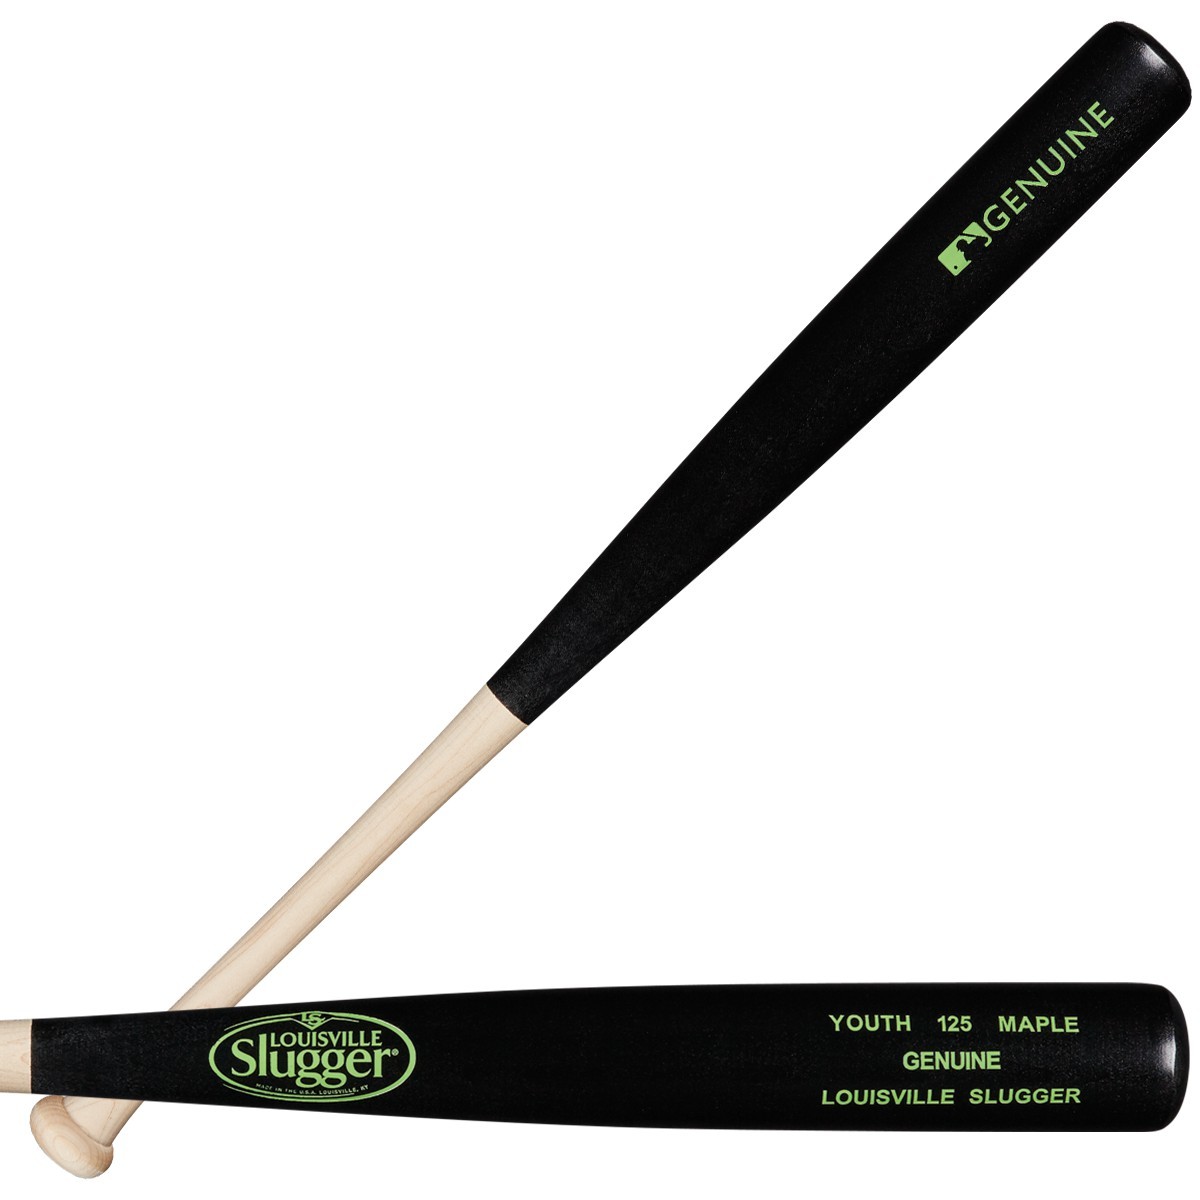 louisville-slugger-youth-125-maple-genuine-wood-baseball-bat-30-inch WTLWYM125A1630 Louisville 887768509064 Priced for every budget and built from dependable maple wood youth